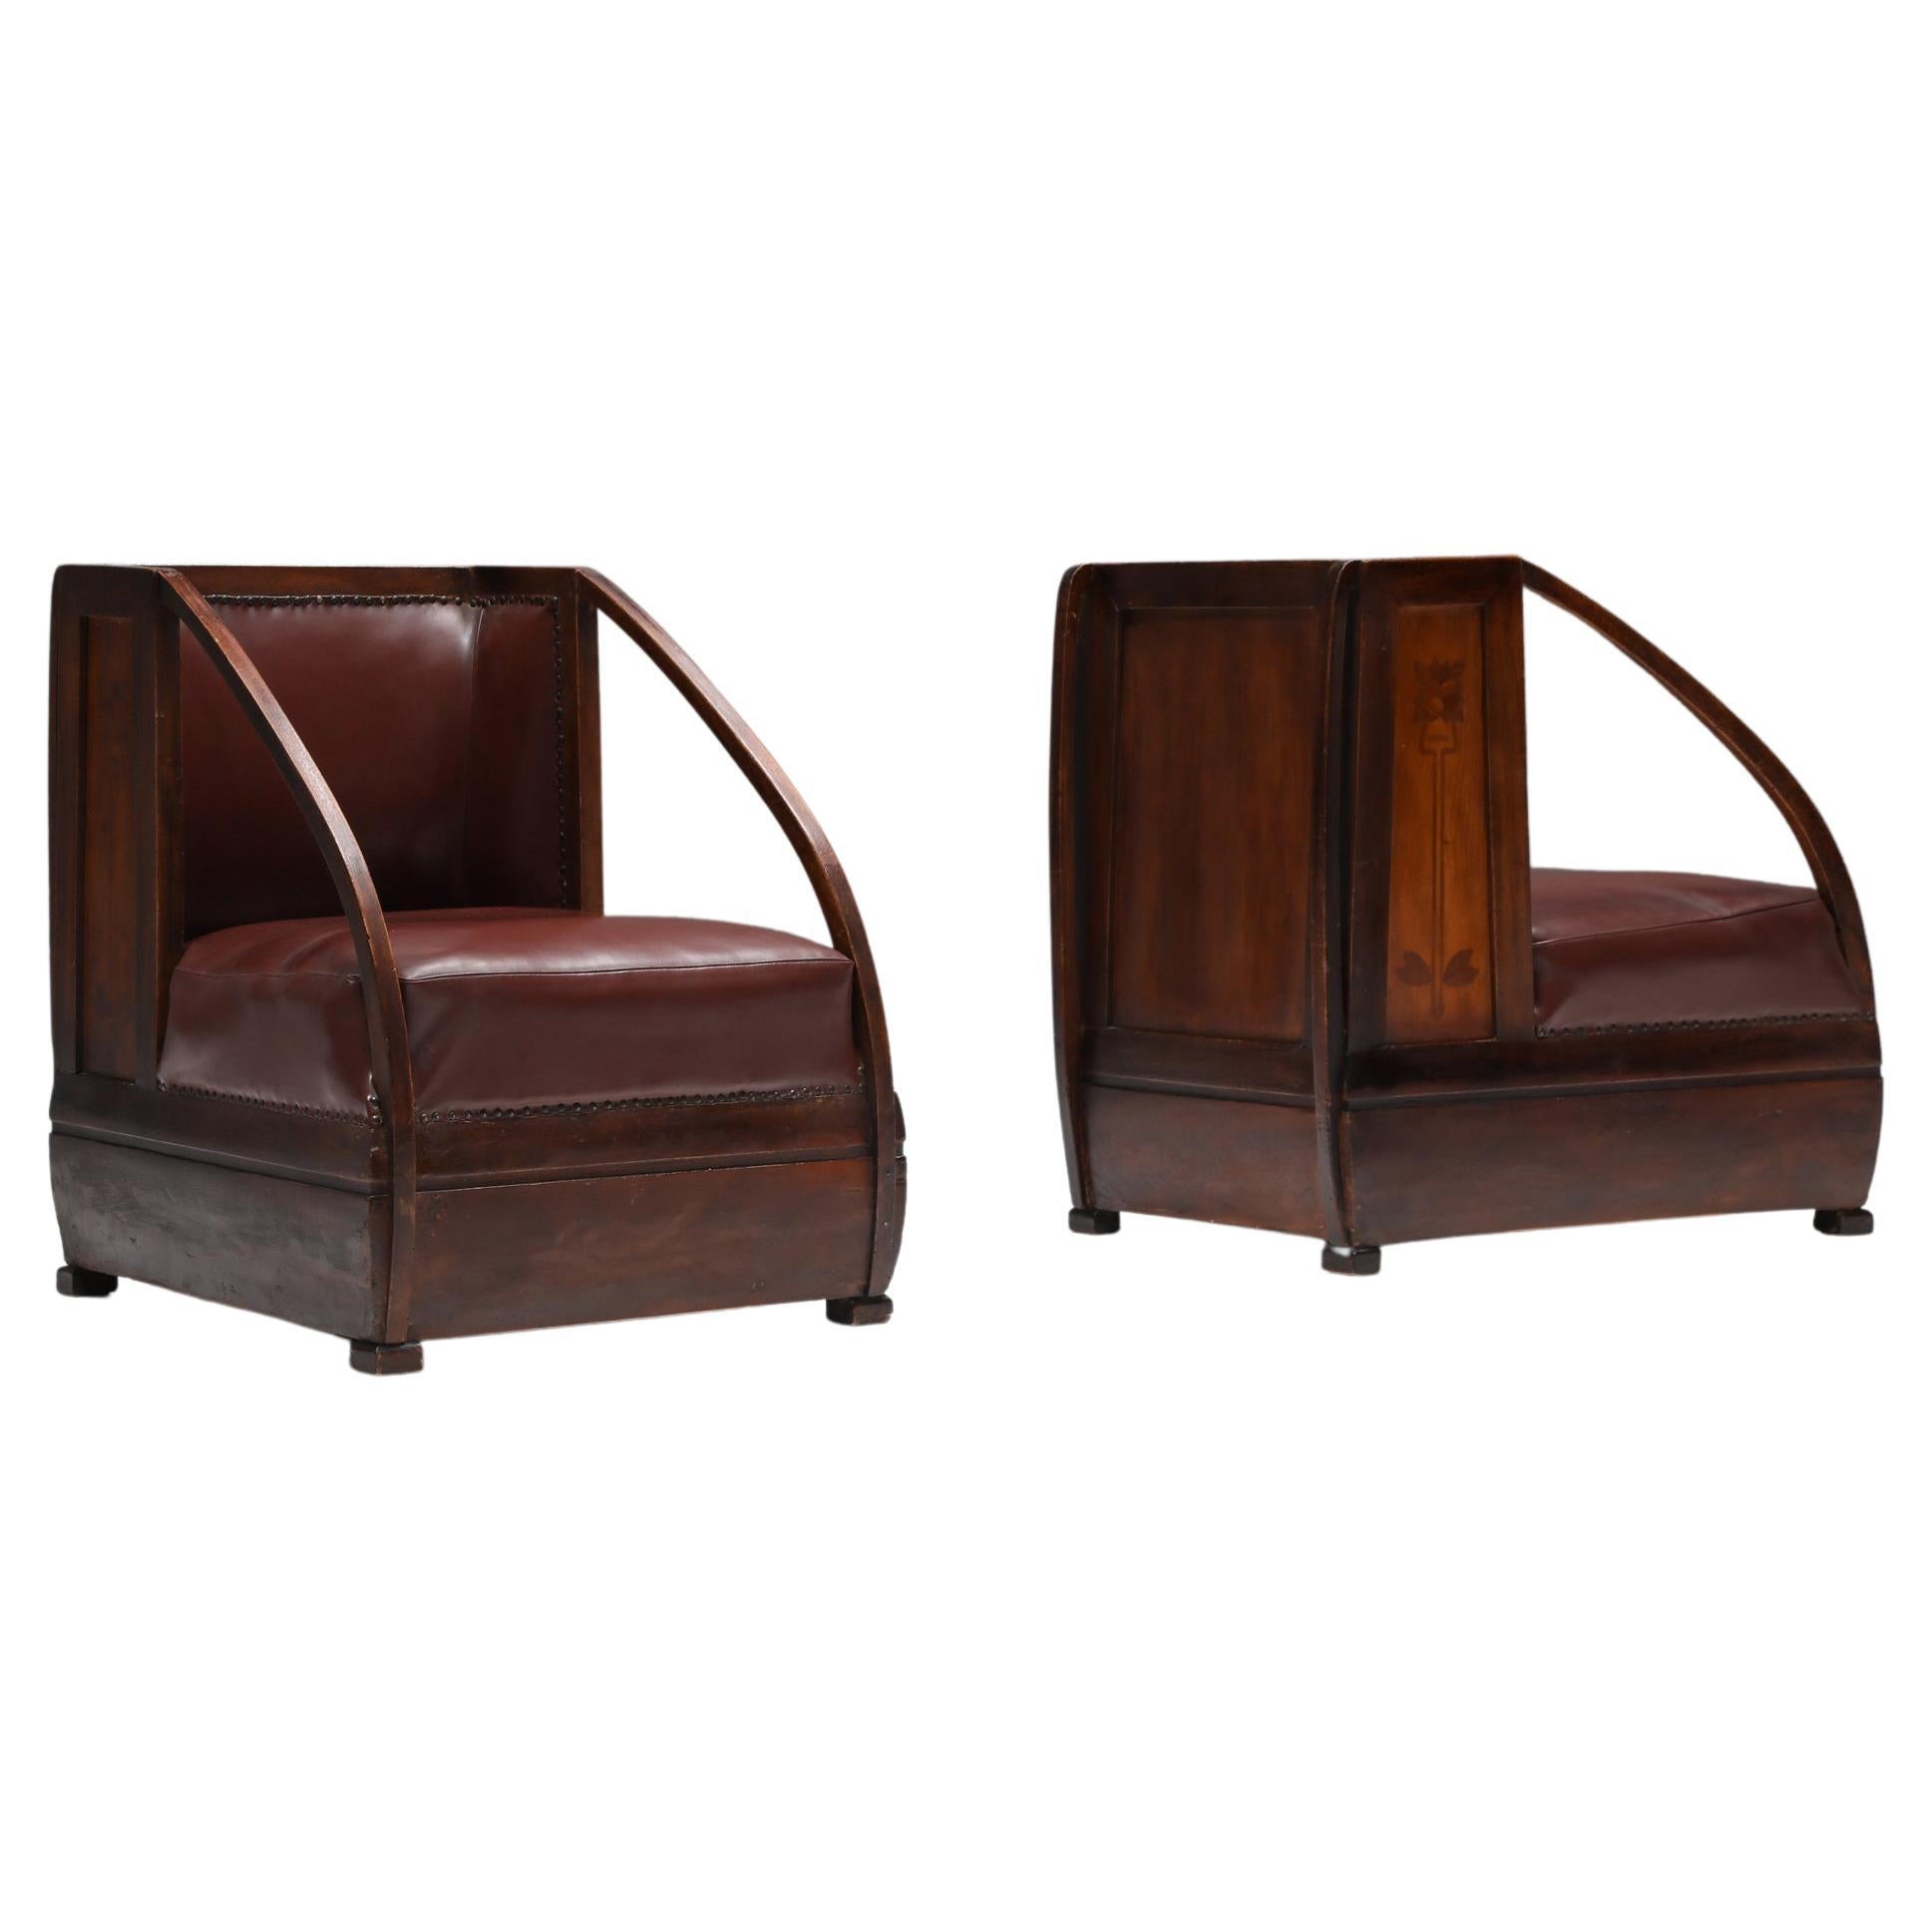 Art Nouveau Carlo and Piero Zen Pair of Armchairs, Fruitwood, Mahogany, 1910 For Sale